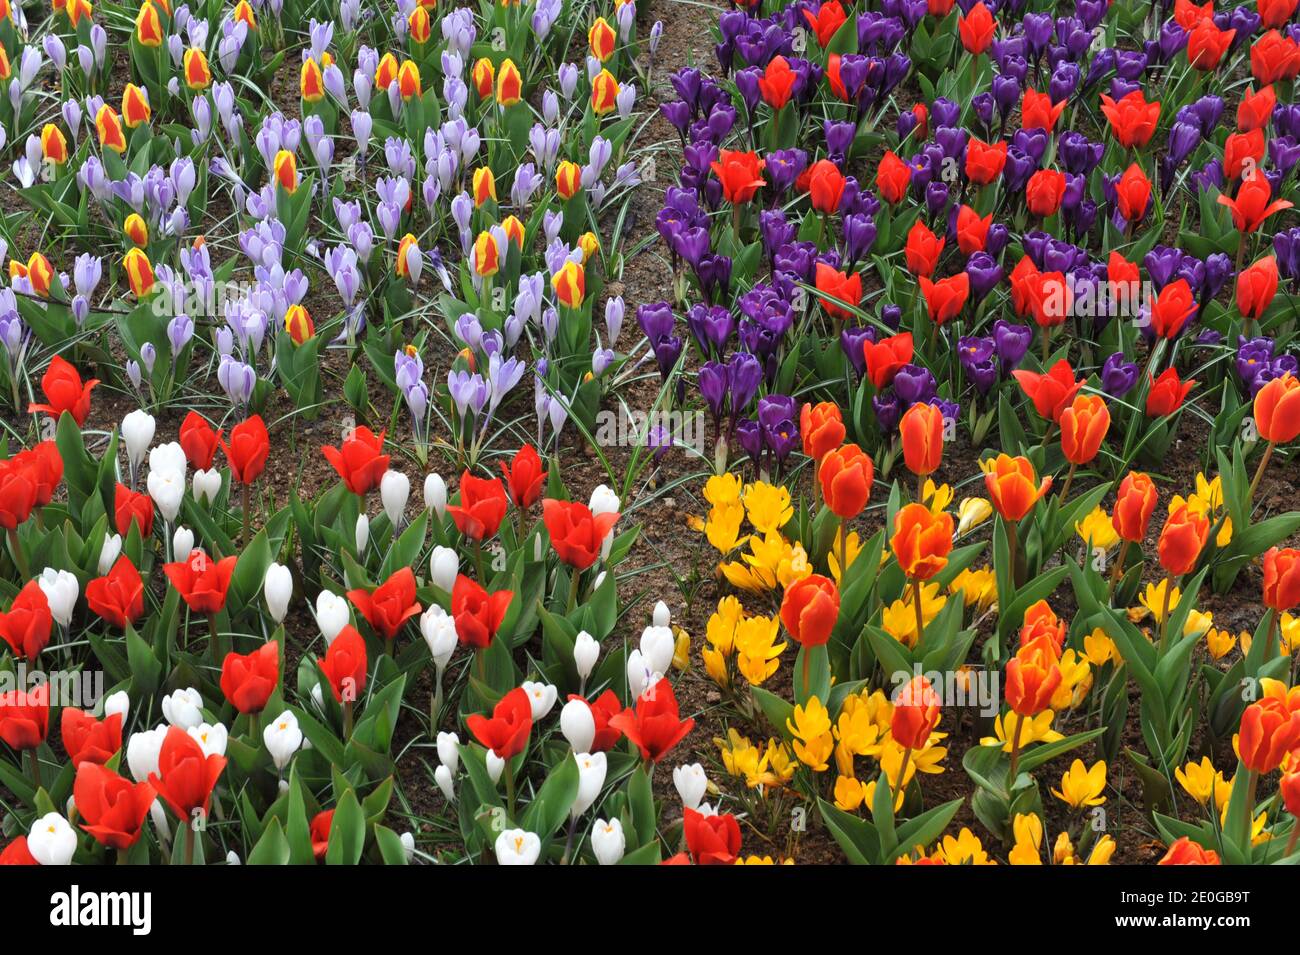 Bright tulips (Tulipa) and crocuses bloom in a garden in March Stock Photo